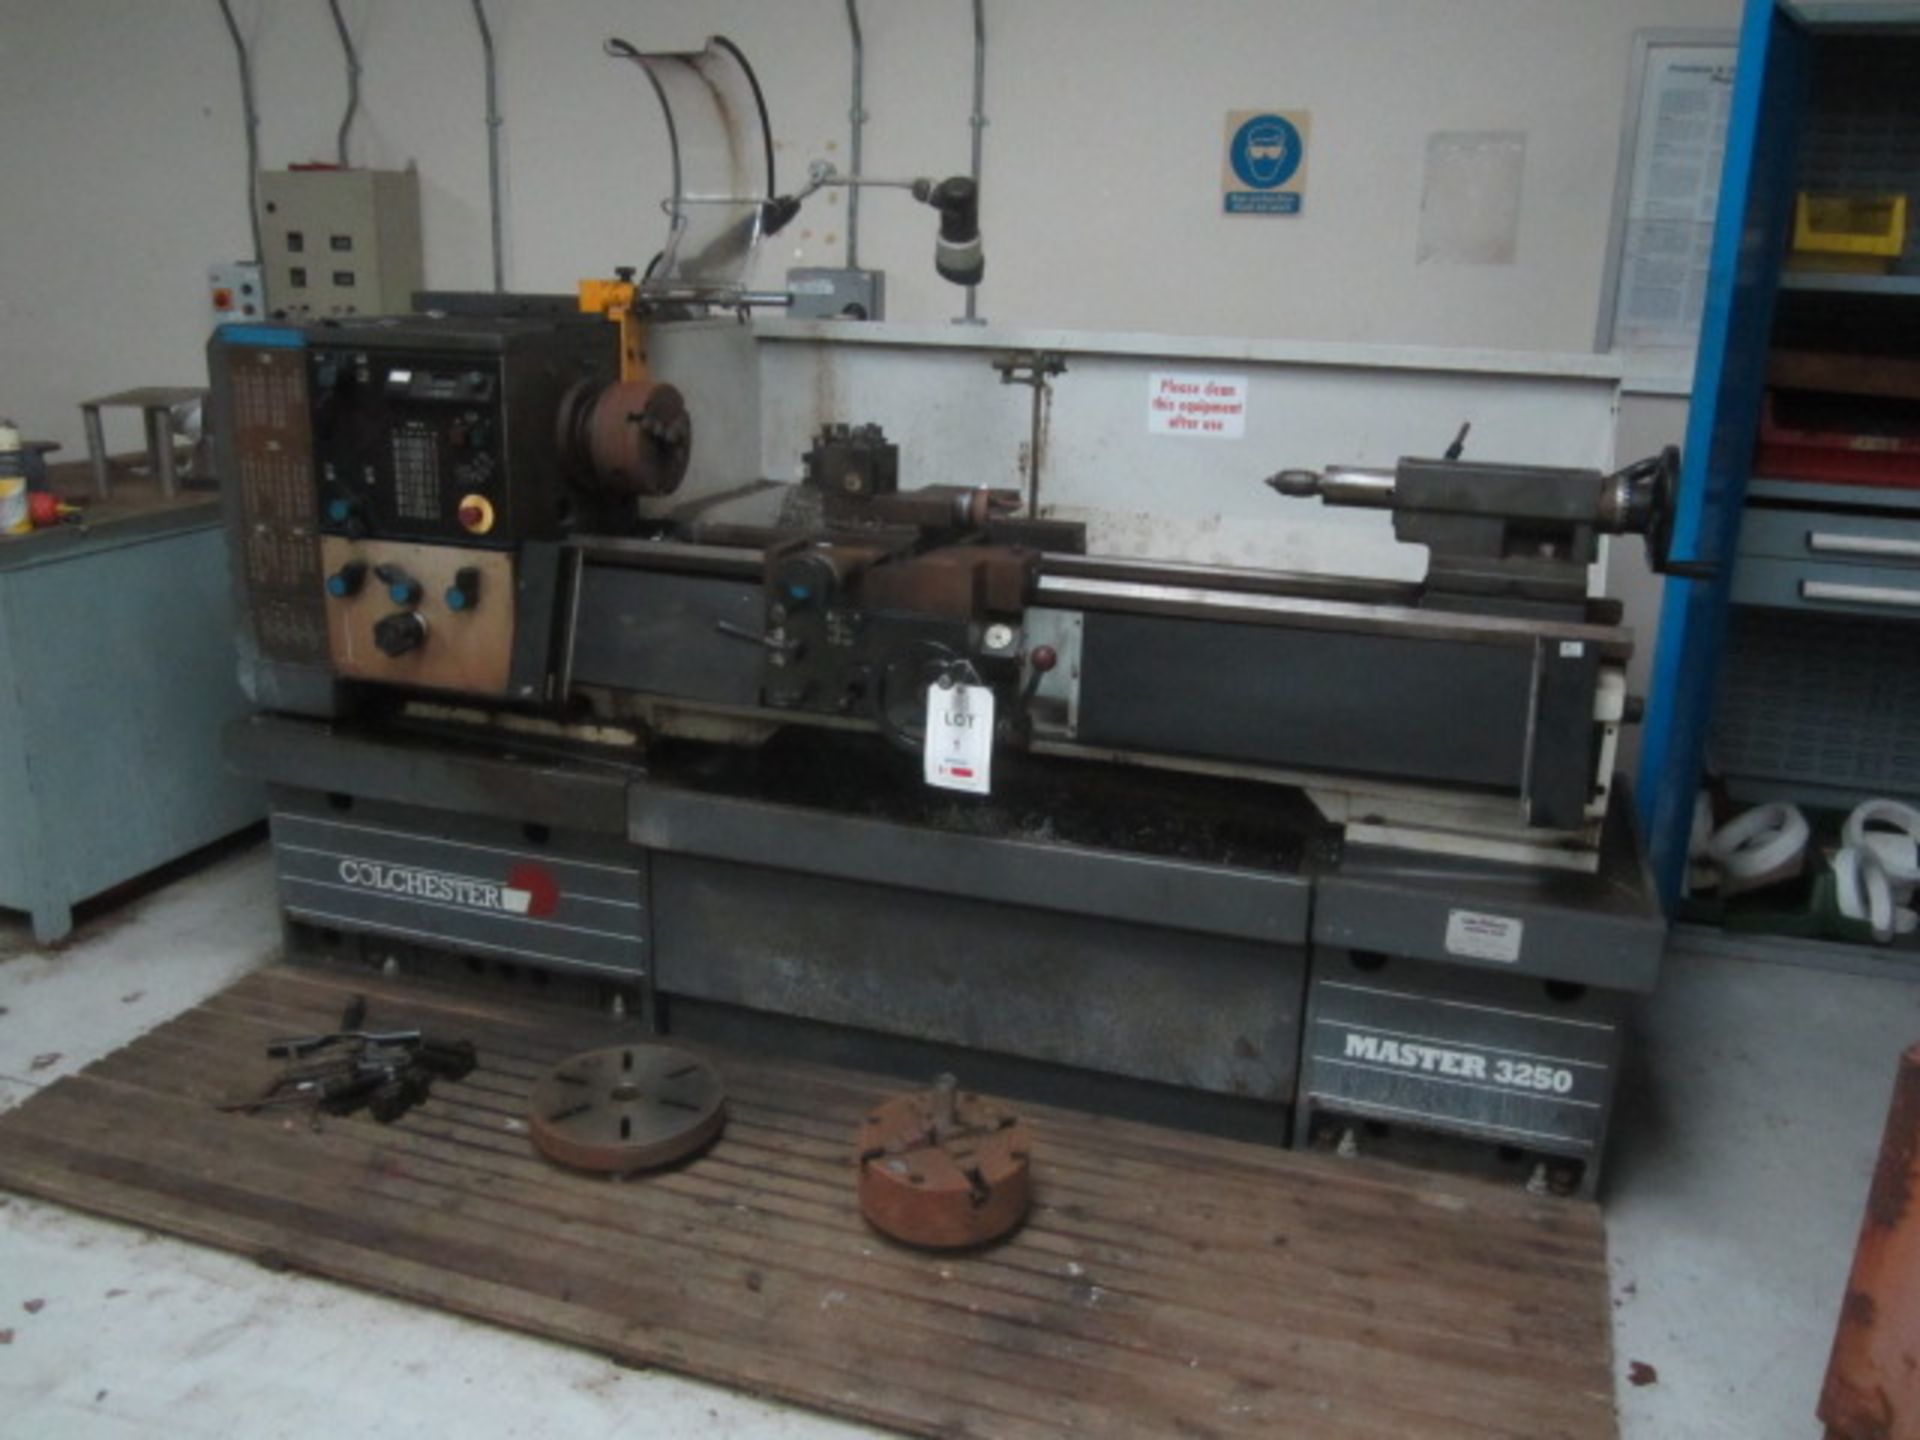 Colchester Master 3250, SS centre lathe, 3 & 4 jaw chuck, quick change tool post, face plate, 0 -